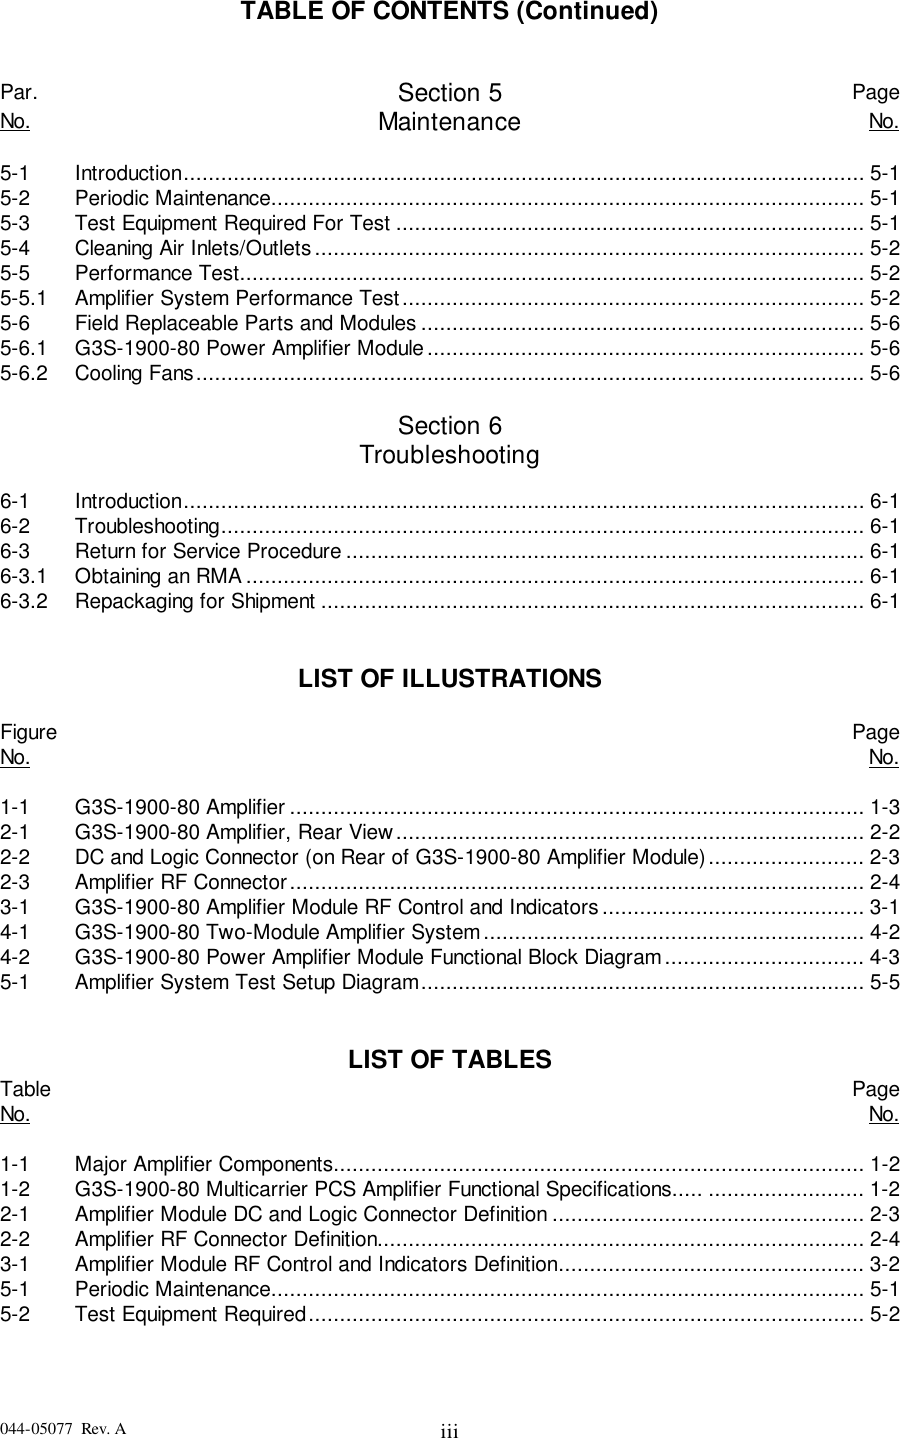 044-05077  Rev. A iiiTABLE OF CONTENTS (Continued)Par. Section 5 PageNo. Maintenance No.5-1 Introduction............................................................................................................. 5-15-2 Periodic Maintenance............................................................................................... 5-15-3 Test Equipment Required For Test ........................................................................... 5-15-4 Cleaning Air Inlets/Outlets........................................................................................ 5-25-5 Performance Test.................................................................................................... 5-25-5.1 Amplifier System Performance Test.......................................................................... 5-25-6 Field Replaceable Parts and Modules ....................................................................... 5-65-6.1 G3S-1900-80 Power Amplifier Module...................................................................... 5-65-6.2 Cooling Fans........................................................................................................... 5-6Section 6Troubleshooting6-1 Introduction............................................................................................................. 6-16-2 Troubleshooting....................................................................................................... 6-16-3 Return for Service Procedure ................................................................................... 6-16-3.1 Obtaining an RMA................................................................................................... 6-16-3.2 Repackaging for Shipment ....................................................................................... 6-1LIST OF ILLUSTRATIONSFigure PageNo. No.1-1 G3S-1900-80 Amplifier ............................................................................................ 1-32-1 G3S-1900-80 Amplifier, Rear View........................................................................... 2-22-2 DC and Logic Connector (on Rear of G3S-1900-80 Amplifier Module)......................... 2-32-3 Amplifier RF Connector............................................................................................ 2-43-1 G3S-1900-80 Amplifier Module RF Control and Indicators.......................................... 3-14-1 G3S-1900-80 Two-Module Amplifier System............................................................. 4-24-2 G3S-1900-80 Power Amplifier Module Functional Block Diagram................................ 4-35-1 Amplifier System Test Setup Diagram....................................................................... 5-5LIST OF TABLESTable PageNo. No.1-1 Major Amplifier Components..................................................................................... 1-21-2 G3S-1900-80 Multicarrier PCS Amplifier Functional Specifications..... ......................... 1-22-1 Amplifier Module DC and Logic Connector Definition .................................................. 2-32-2 Amplifier RF Connector Definition.............................................................................. 2-43-1 Amplifier Module RF Control and Indicators Definition................................................. 3-25-1 Periodic Maintenance............................................................................................... 5-15-2 Test Equipment Required......................................................................................... 5-2